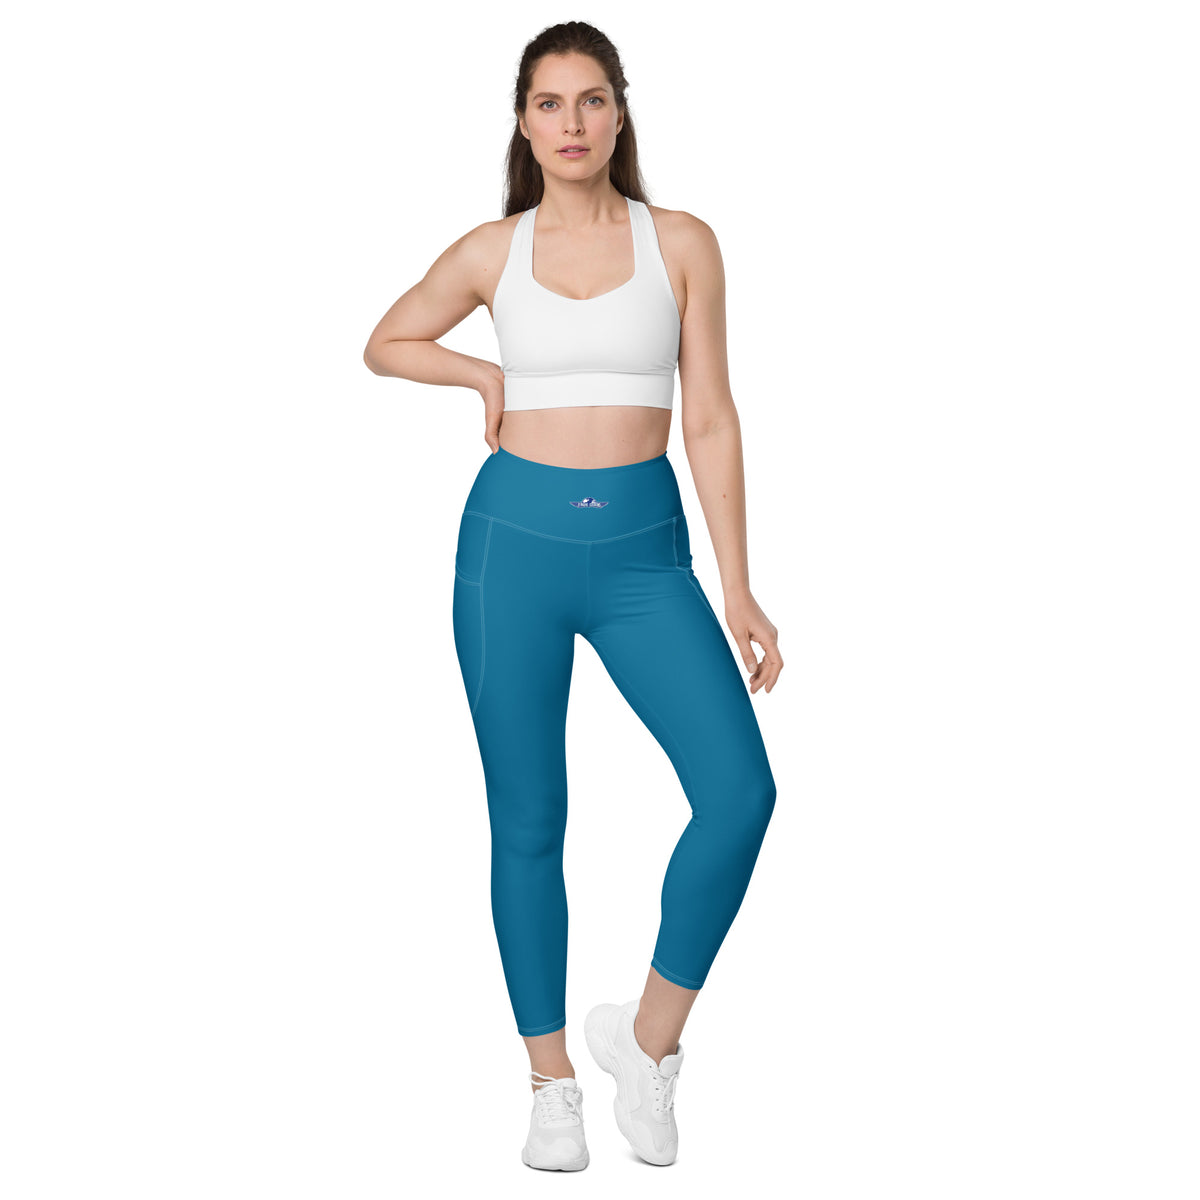 Cerulean Blue Leggings with Pockets